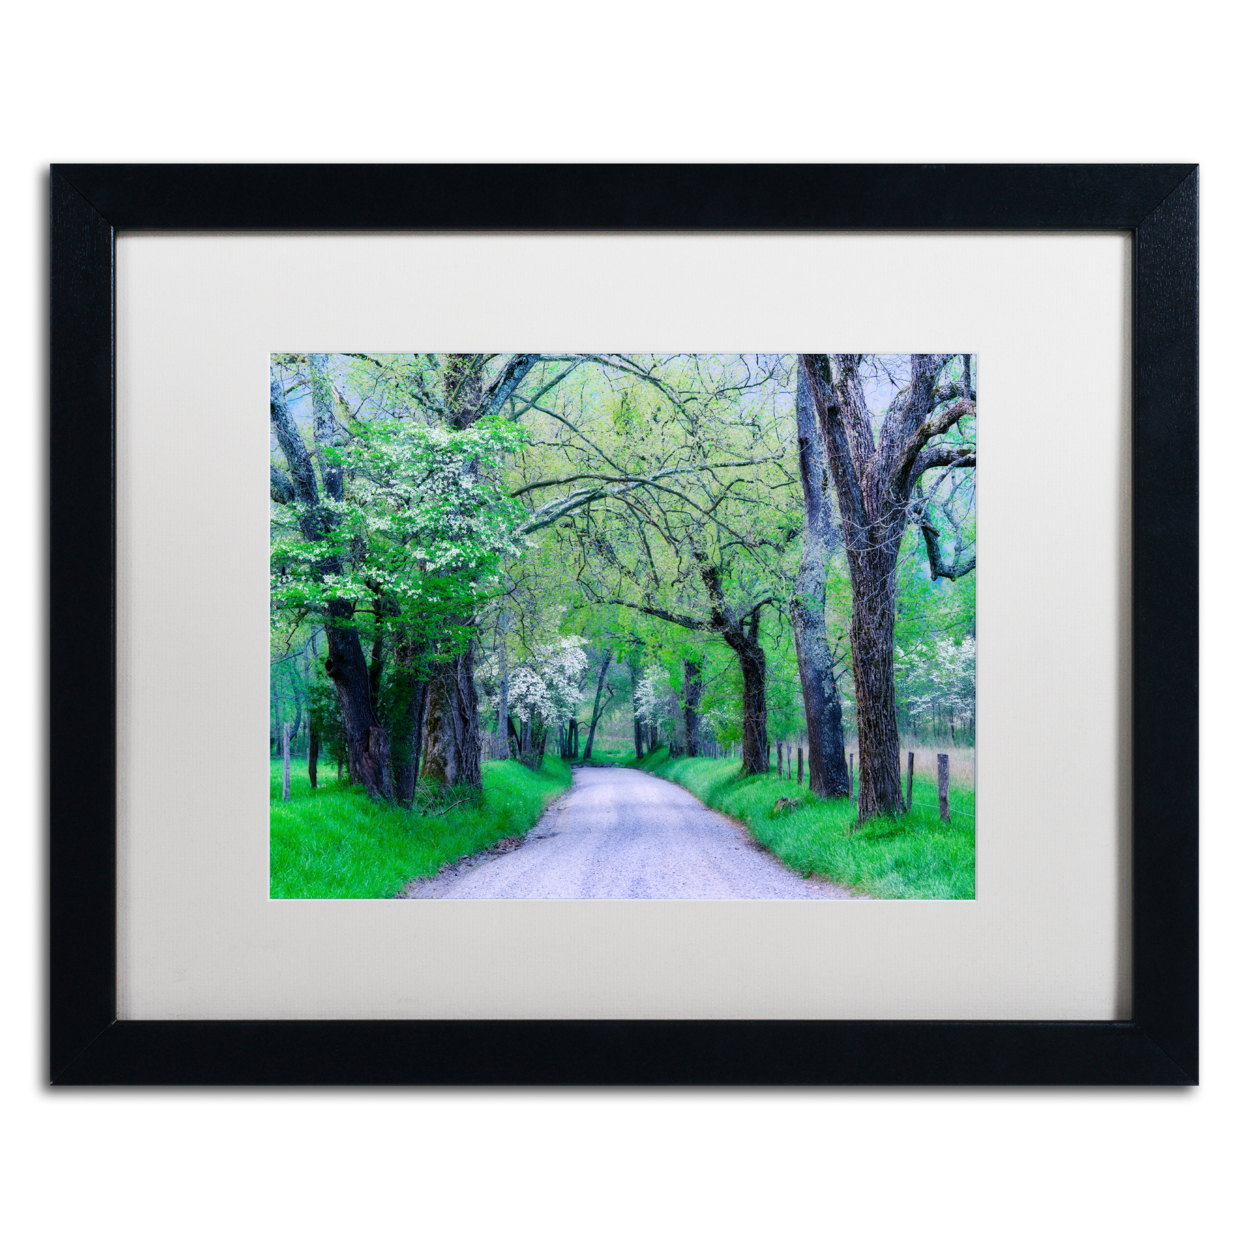 Michael Blanchette Photography 'Cades Cove Lane' Black Wooden Framed Art 18 X 22 Inches